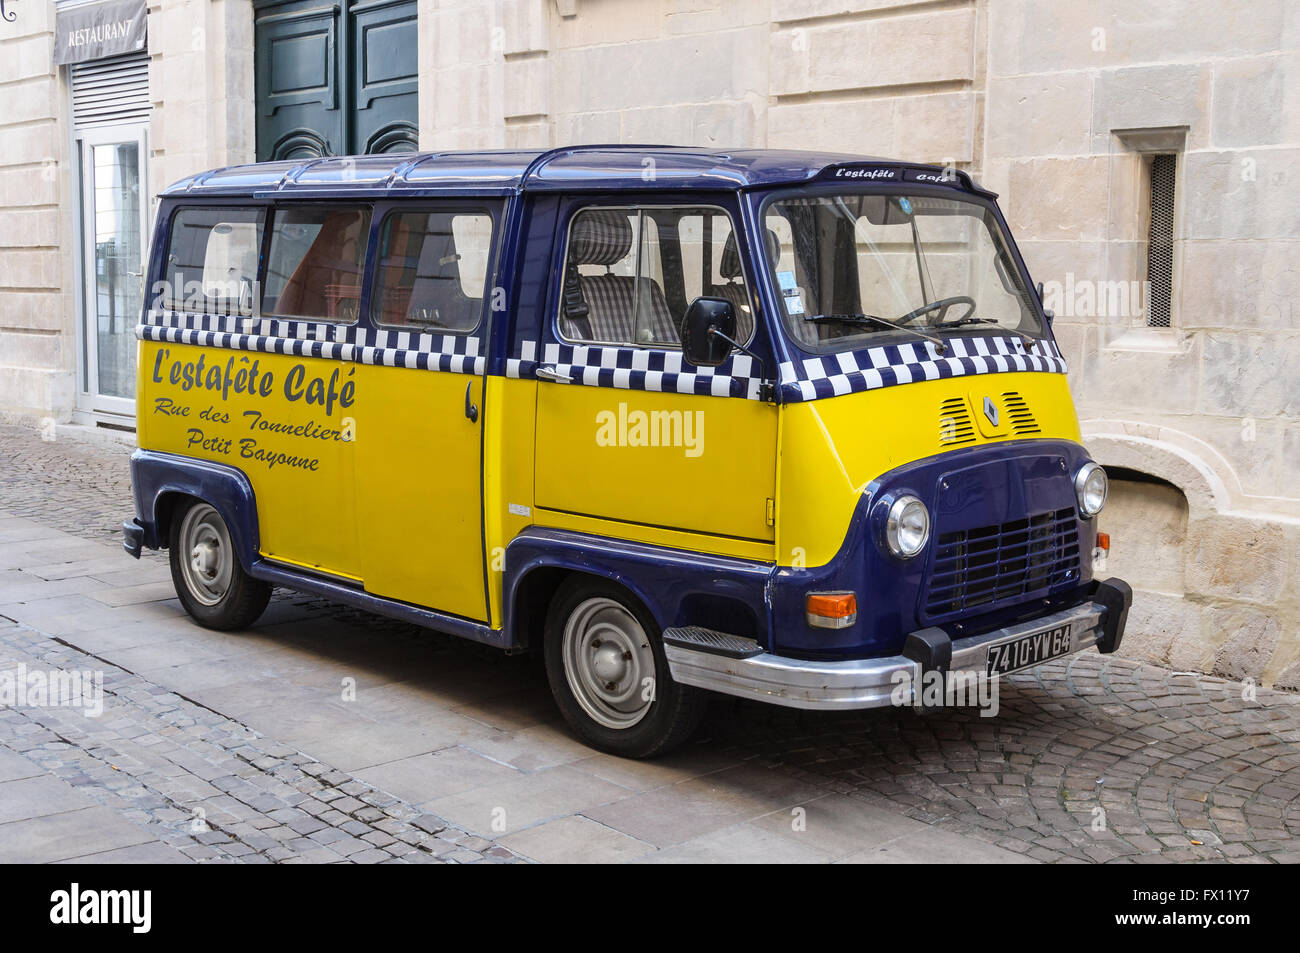 A Renault Estafette painted at the colours of L'estafete Cafe in Bayonne, France Stock Photo